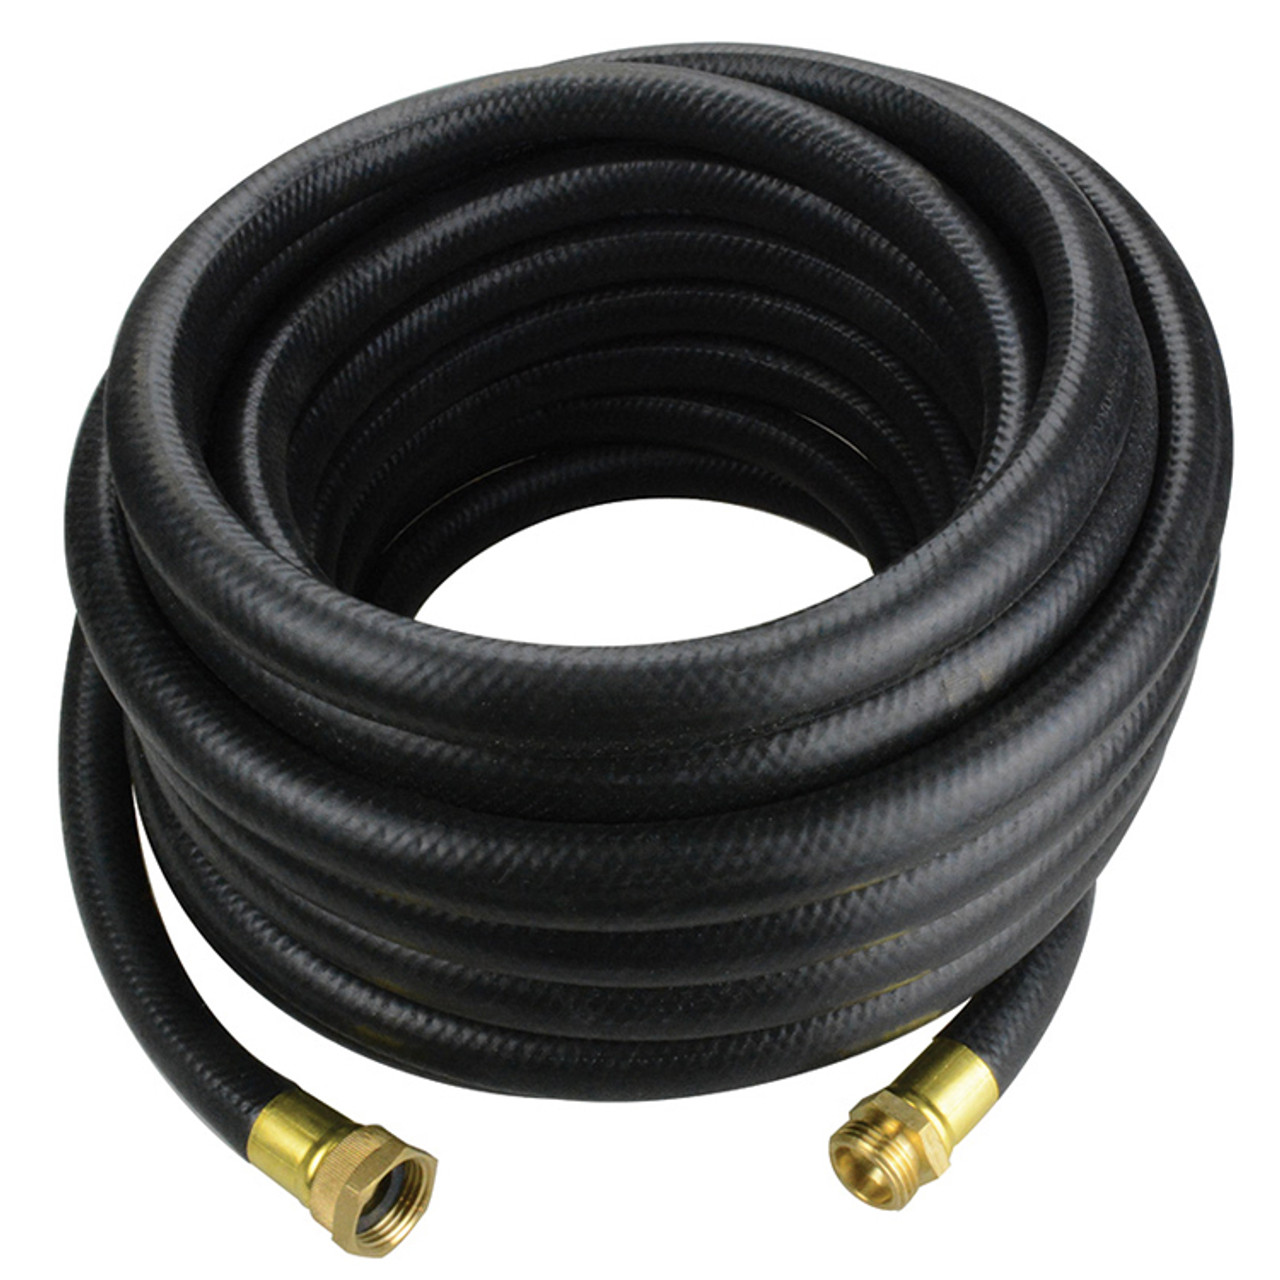 1/2" x 75' Industrial Water Hose Assembly   G311-050GHT75